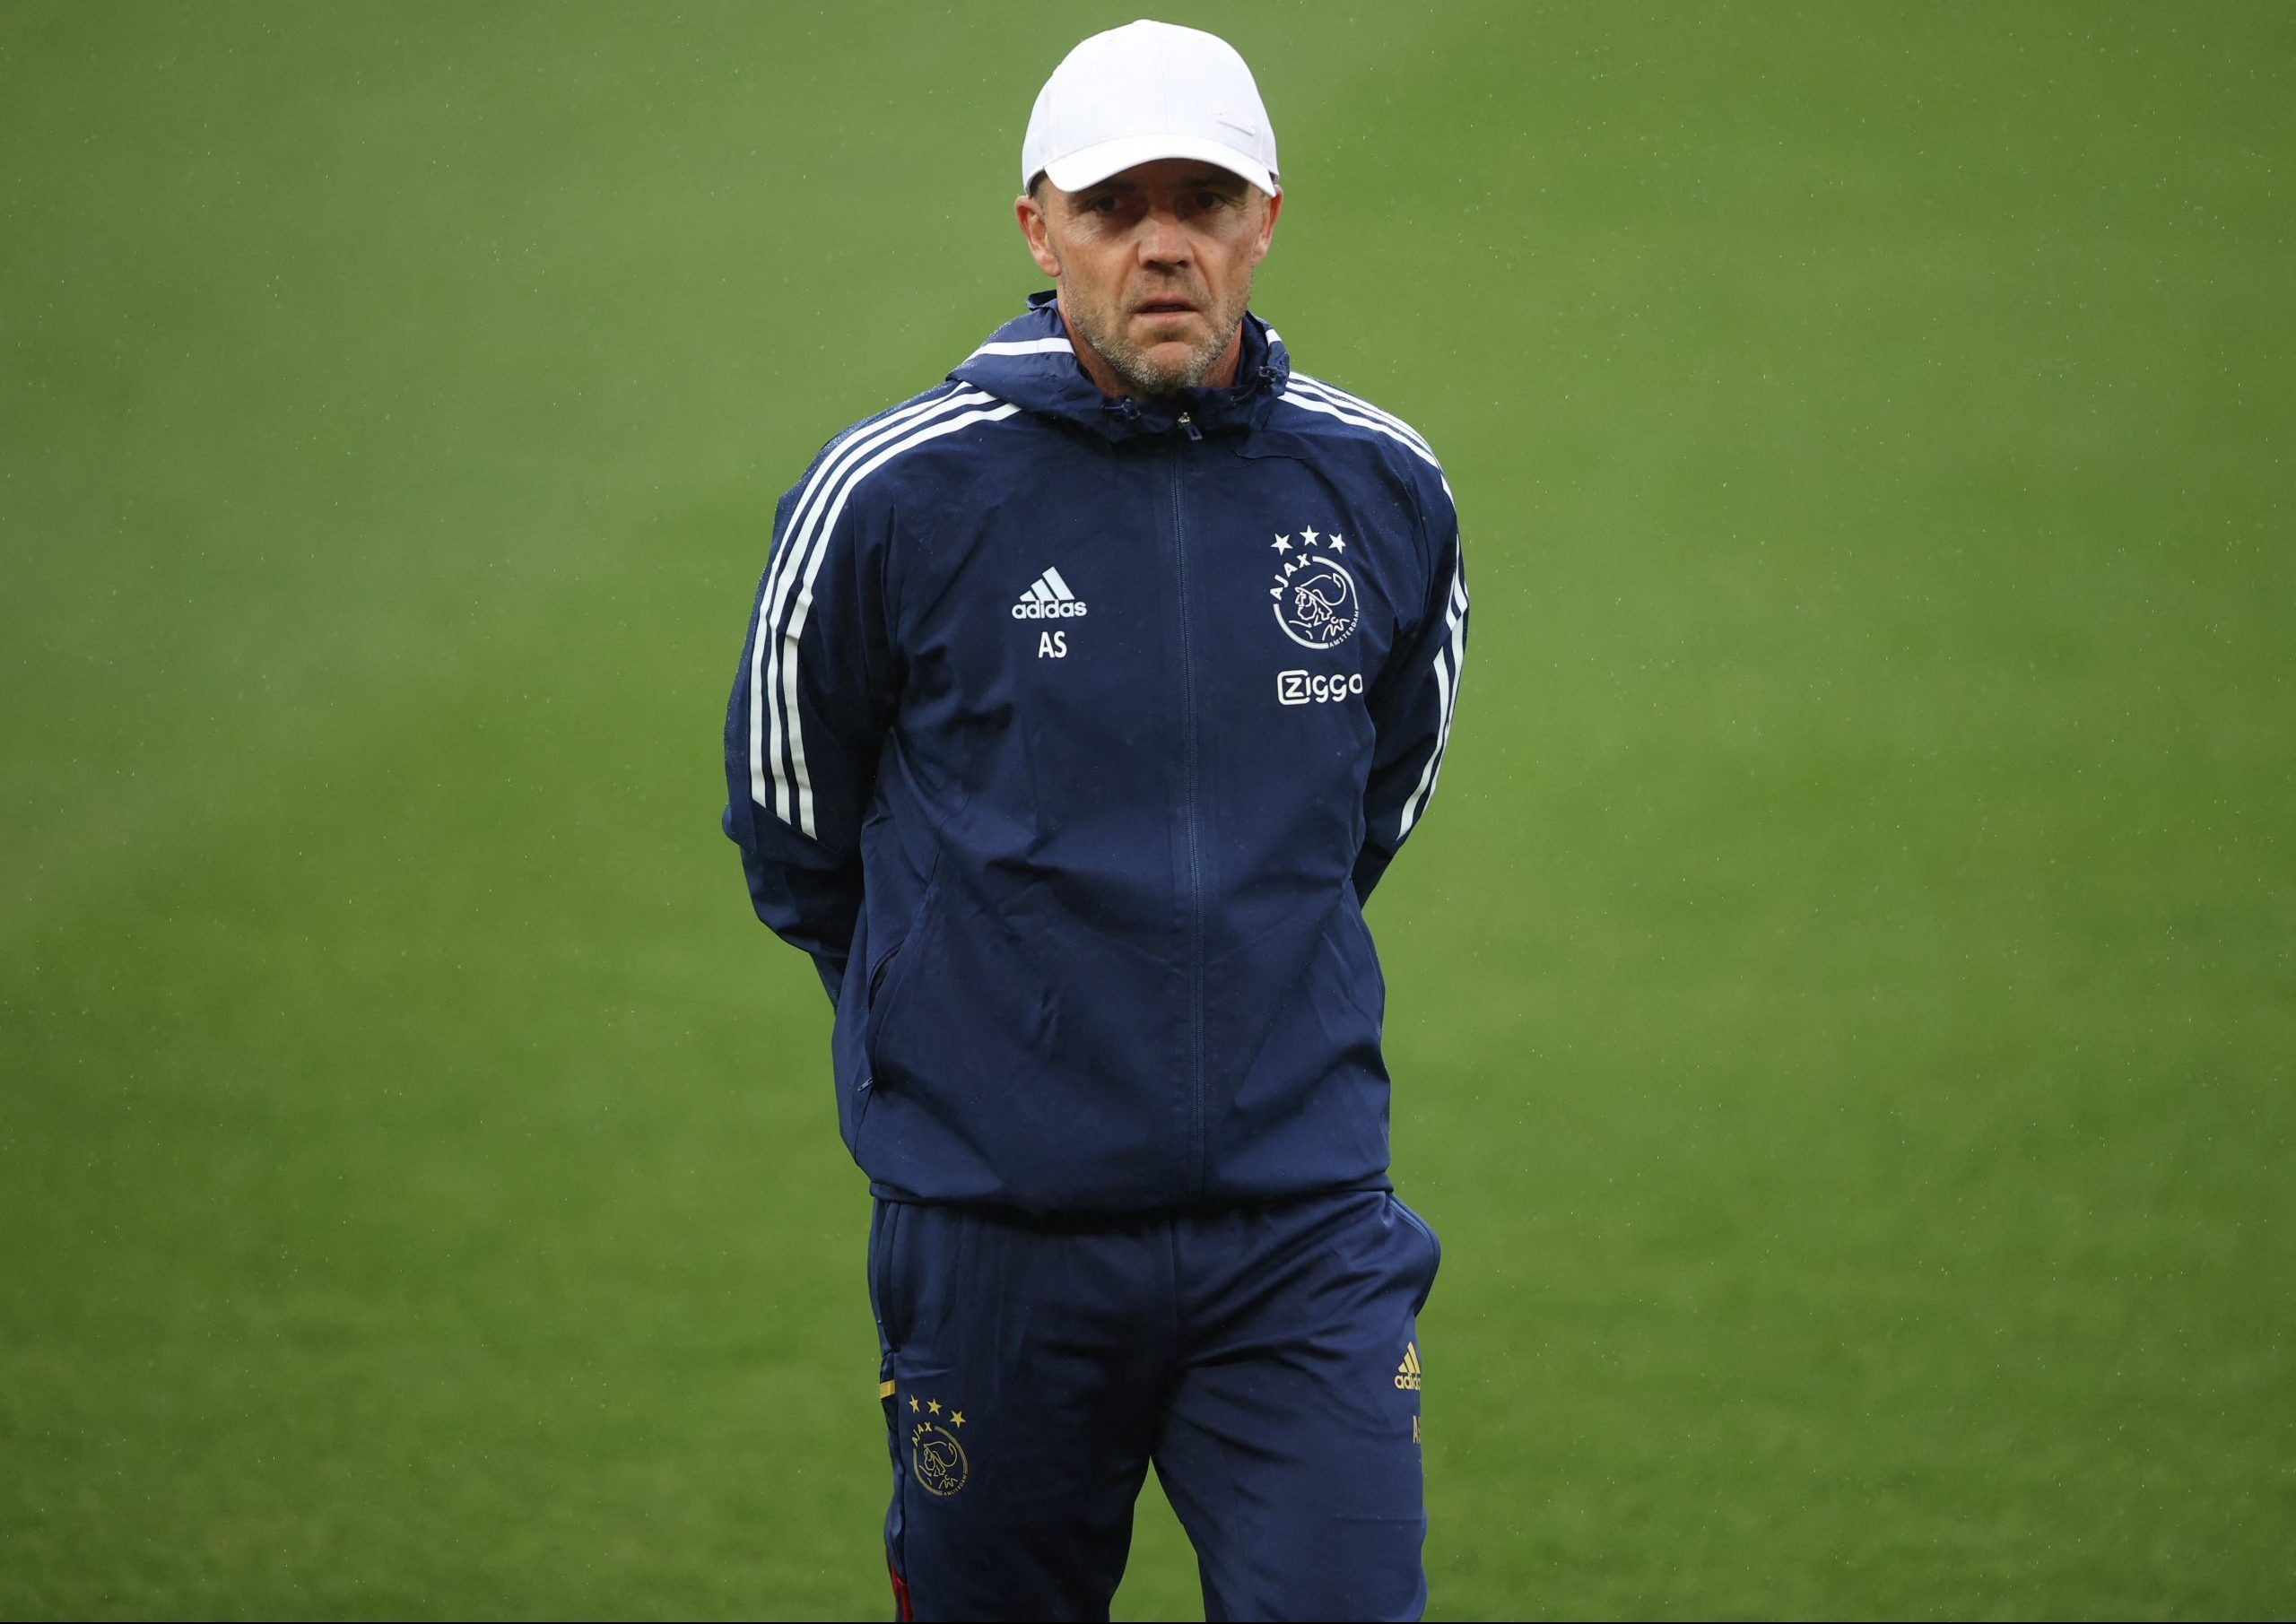 Soccer Football - Champions League - Ajax Training - Anfield, Liverpool, Britain - September 12, 2022 Ajax coach Alfred Schreuder during training Action Images via Reuters/Molly Darlington